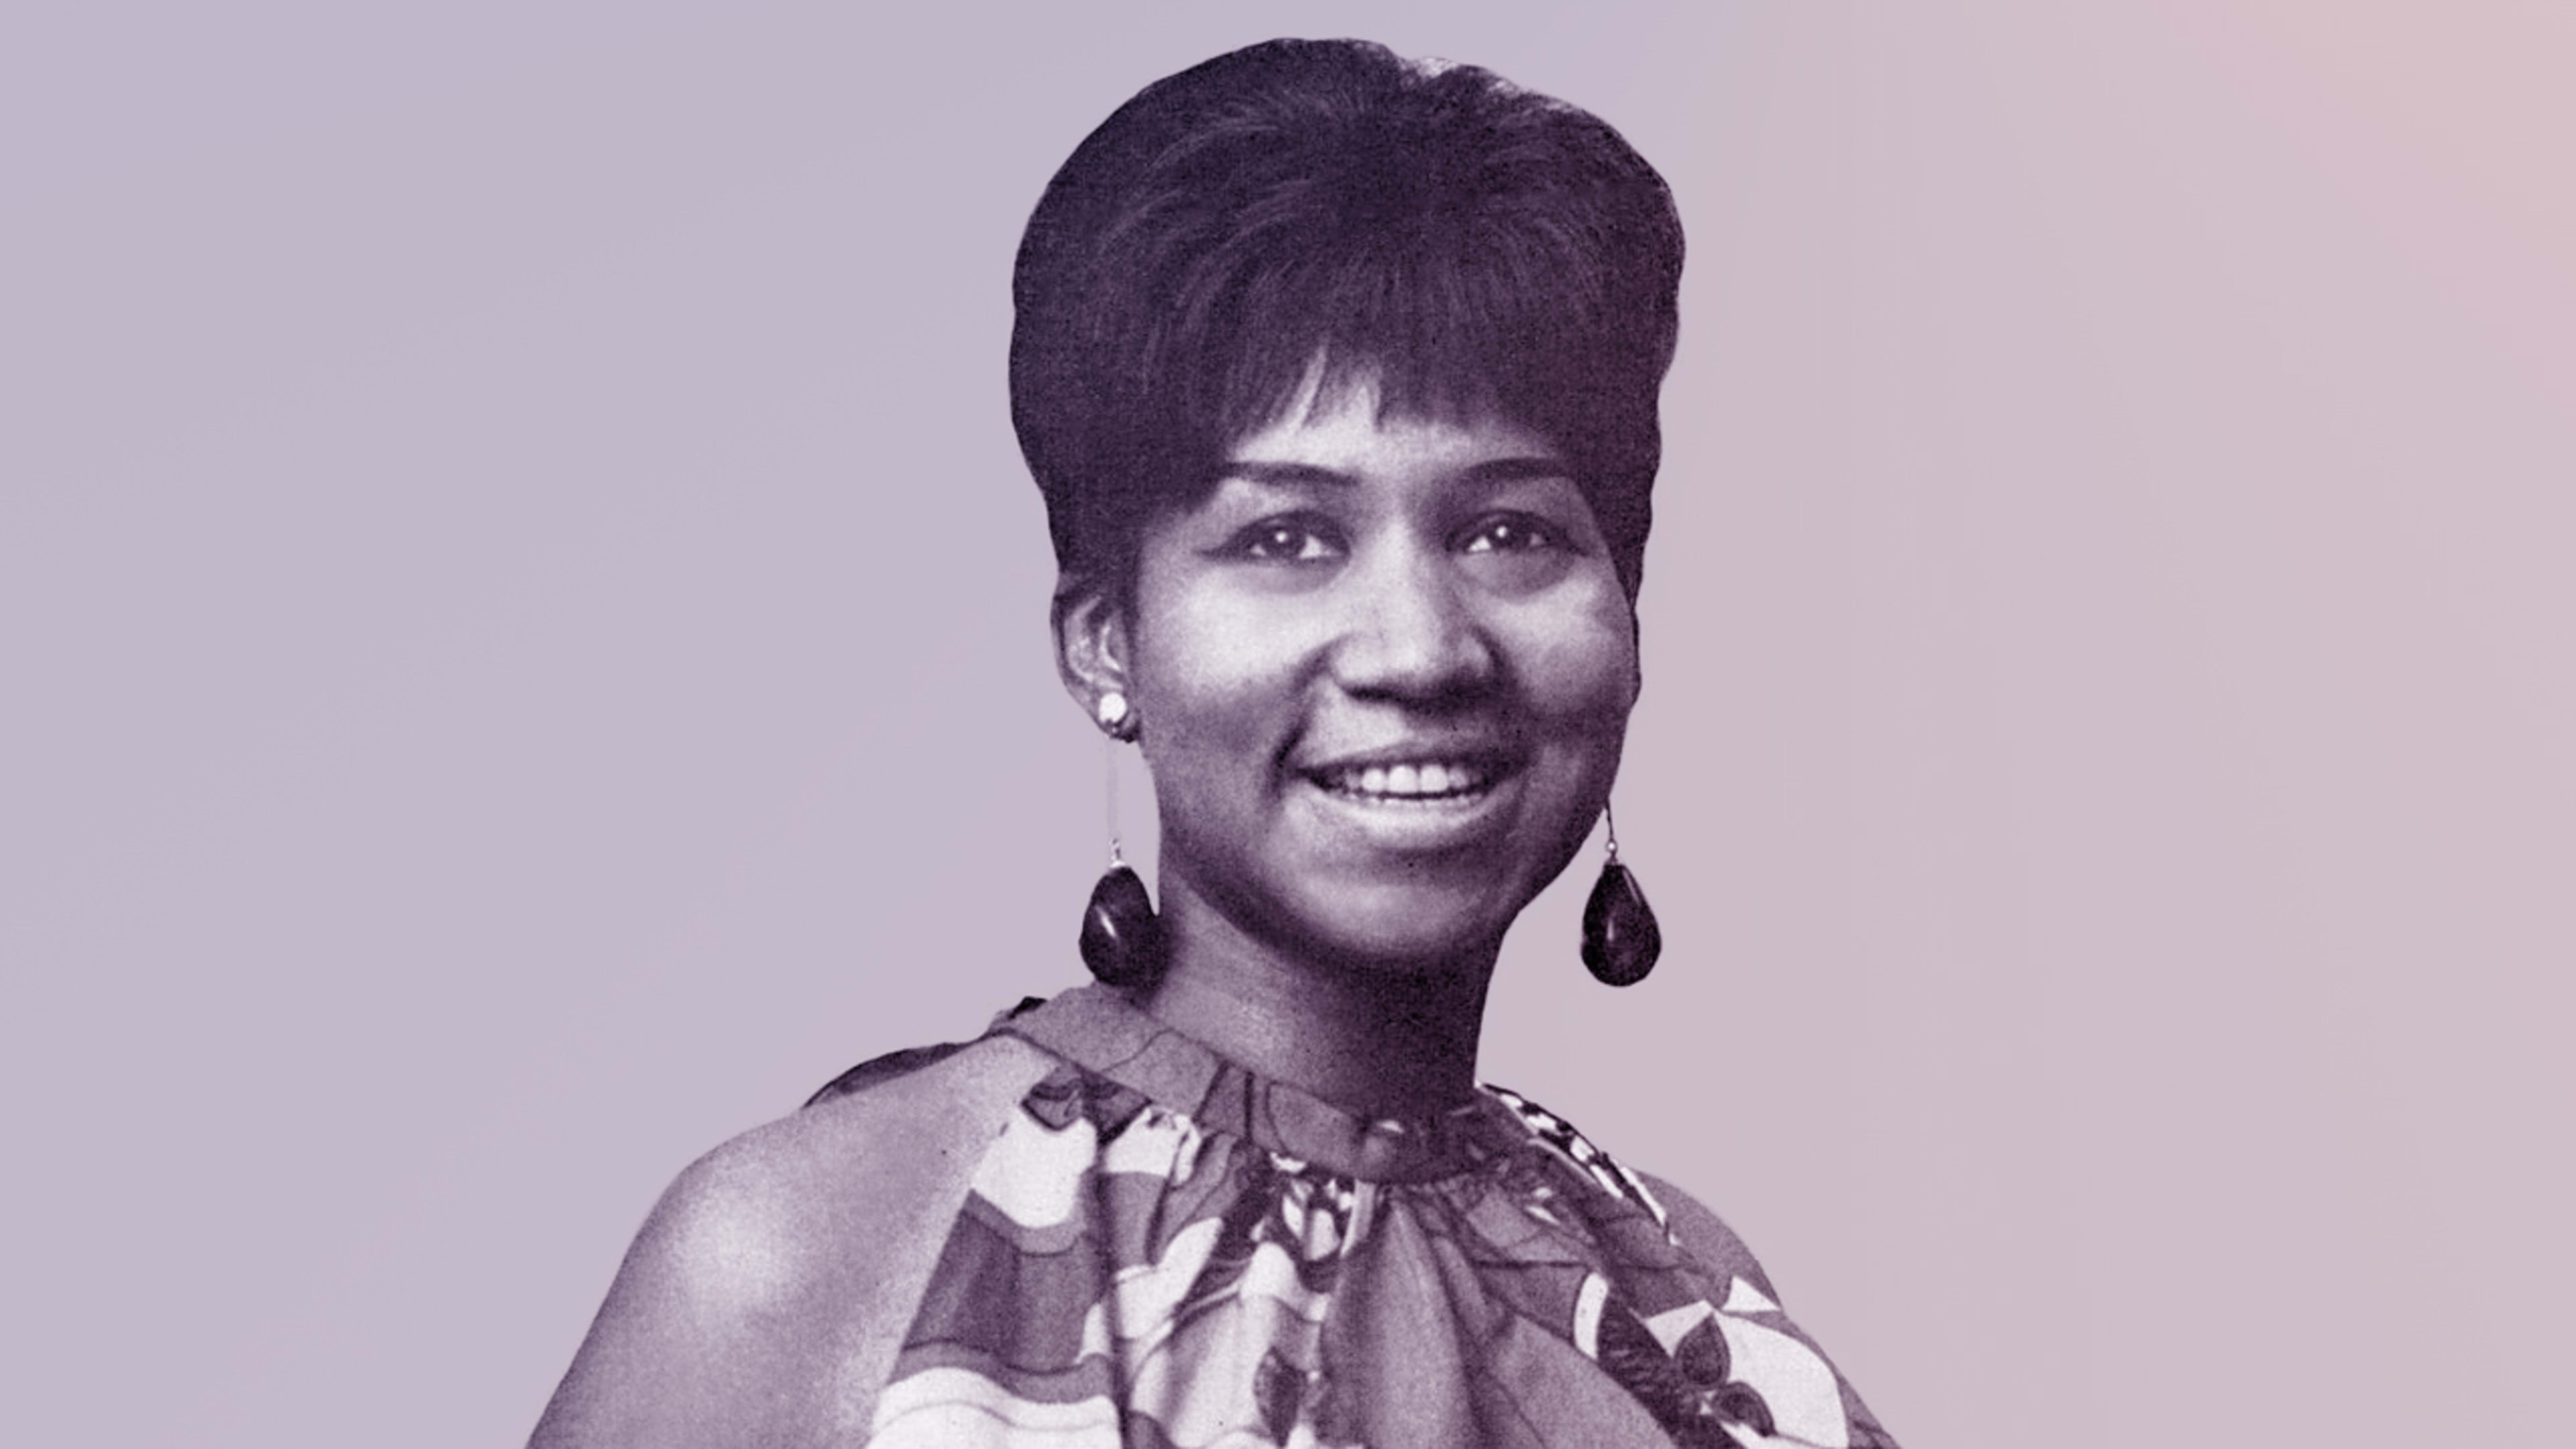 Tim Cook, Diana Ross, Michelle Obama, and others mourn Aretha Franklin’s death